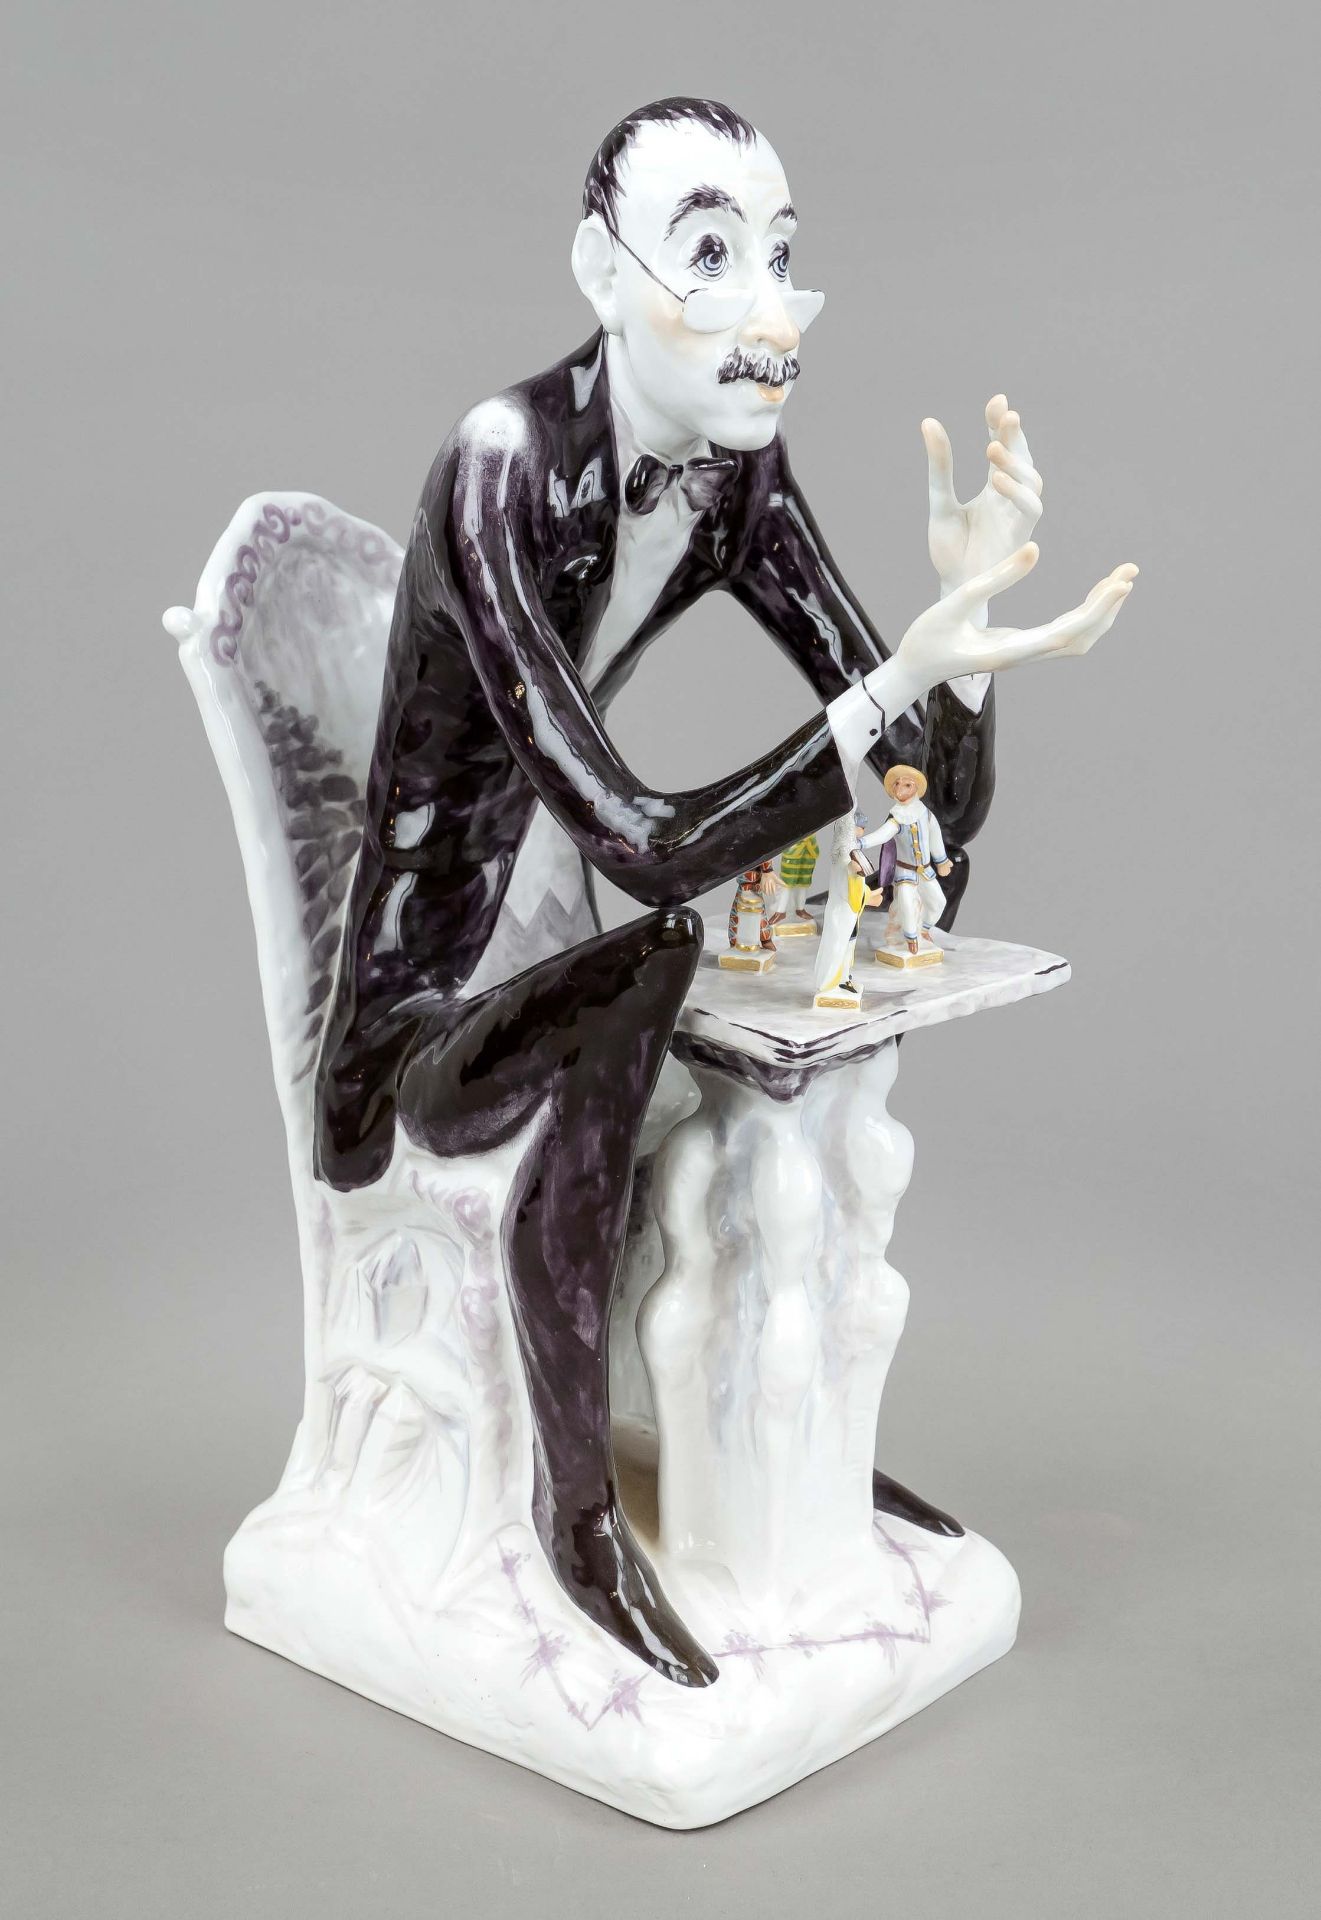 The collector, Meissen, year mark 1993, 1st choice Monogrammed. Model no: 73530, designed by Peter